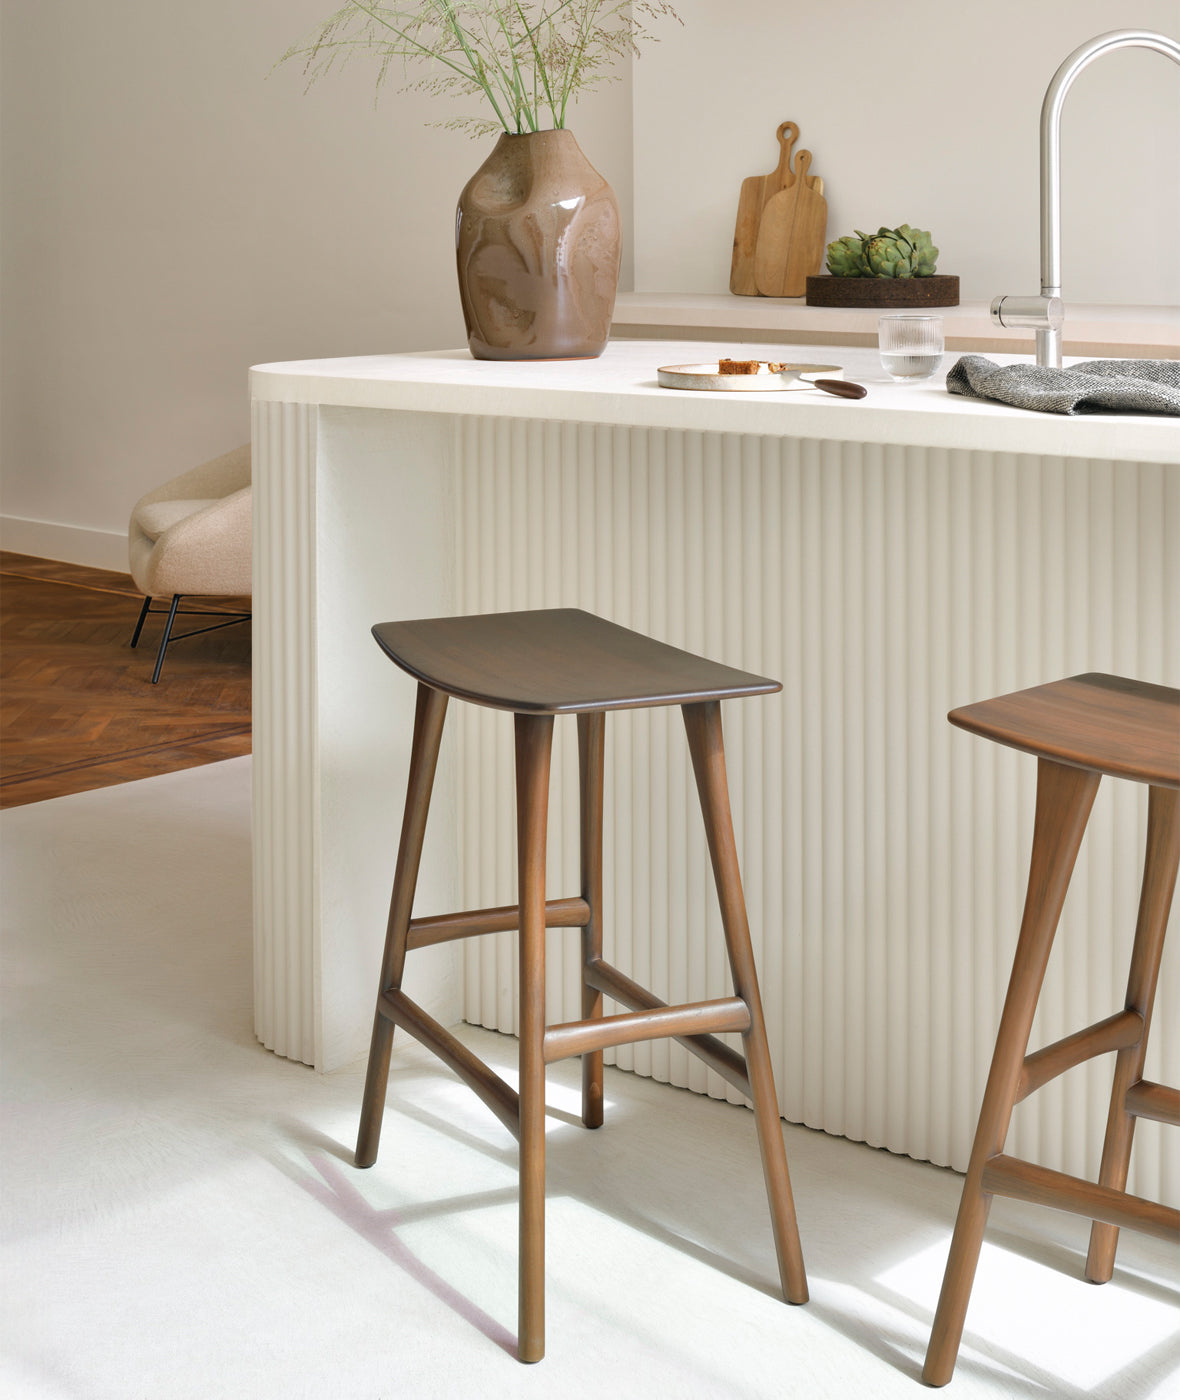 Osso Counter + Bar Stools - More Options